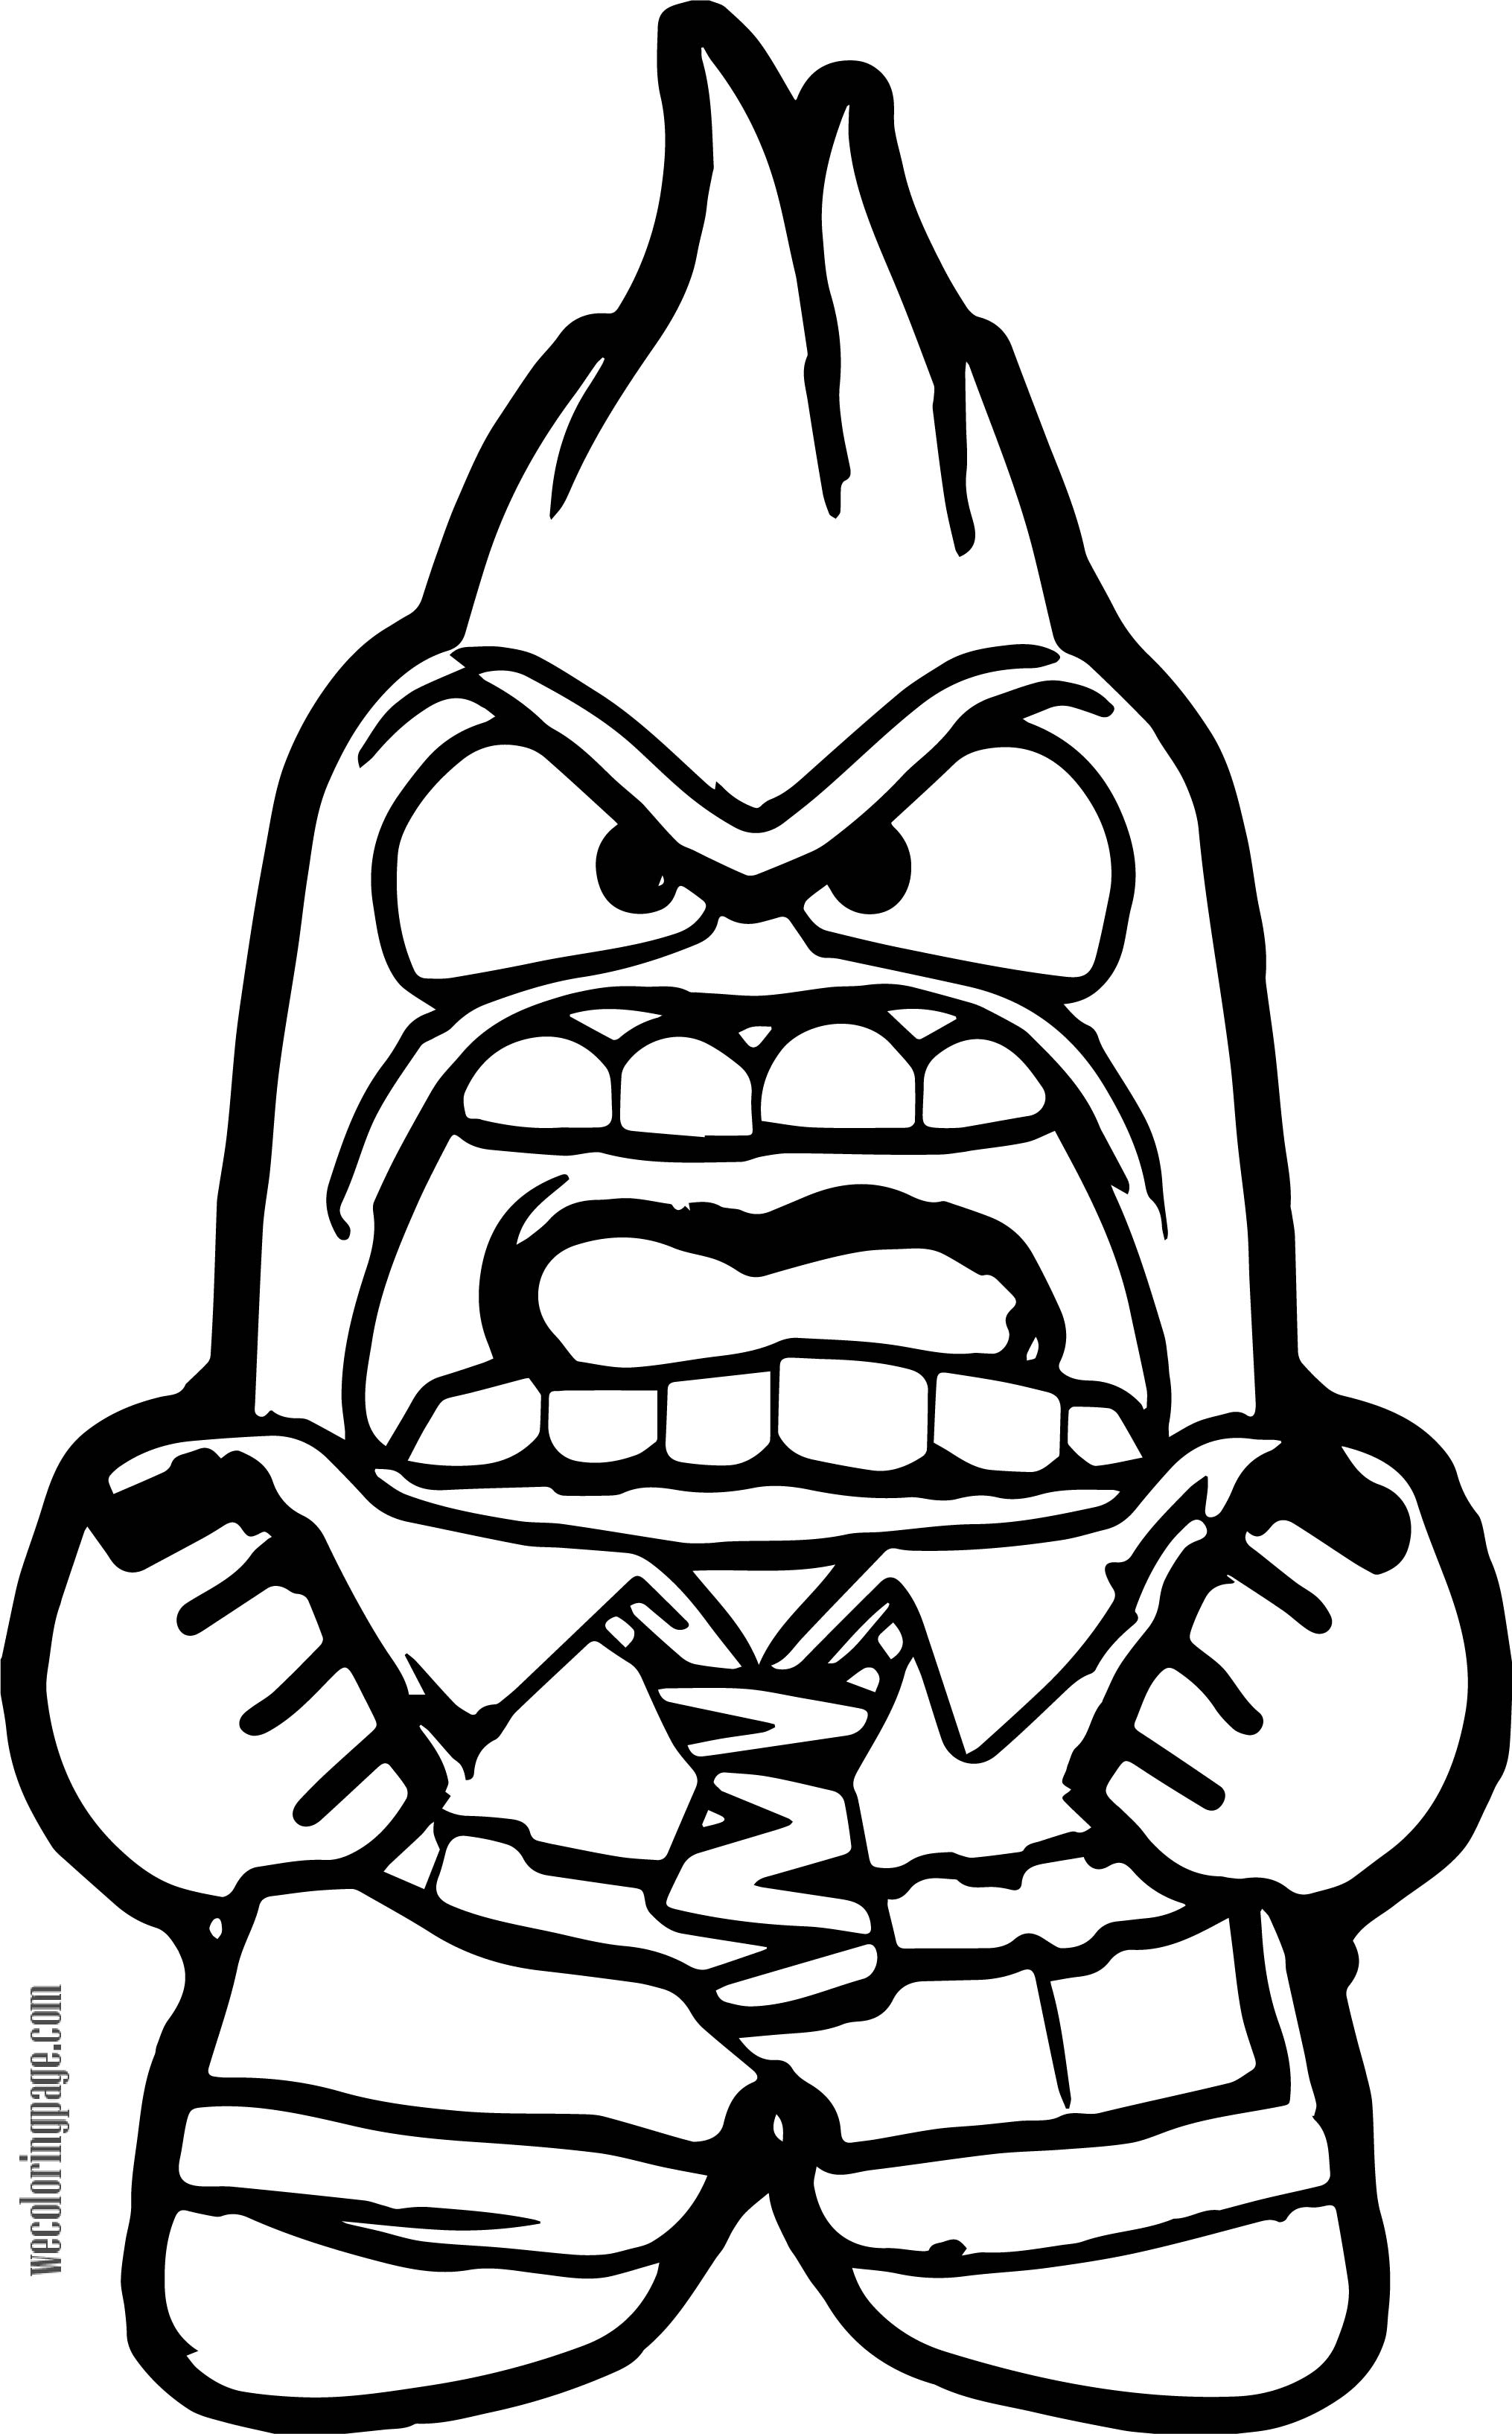 Anger Iceberg Coloring Page